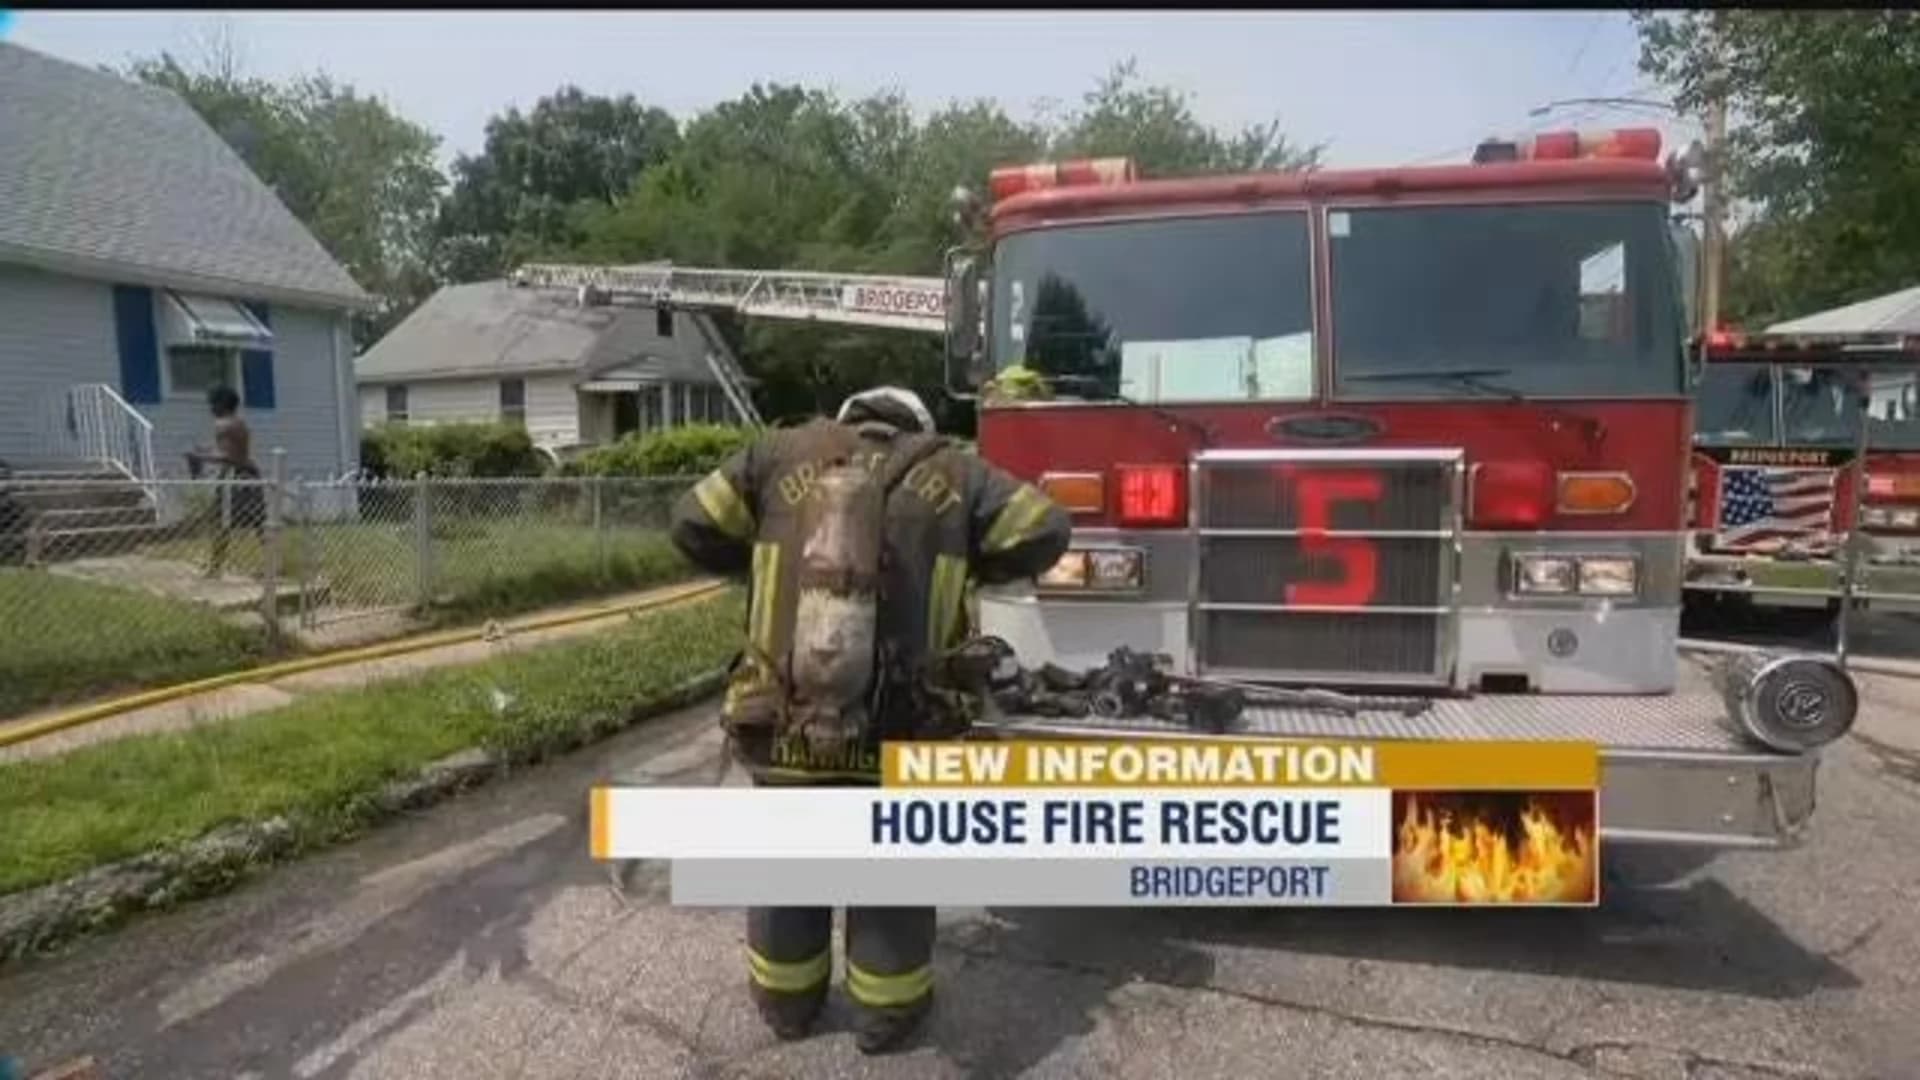 Good Samaritans help rescue woman from house fire in Bridgeport